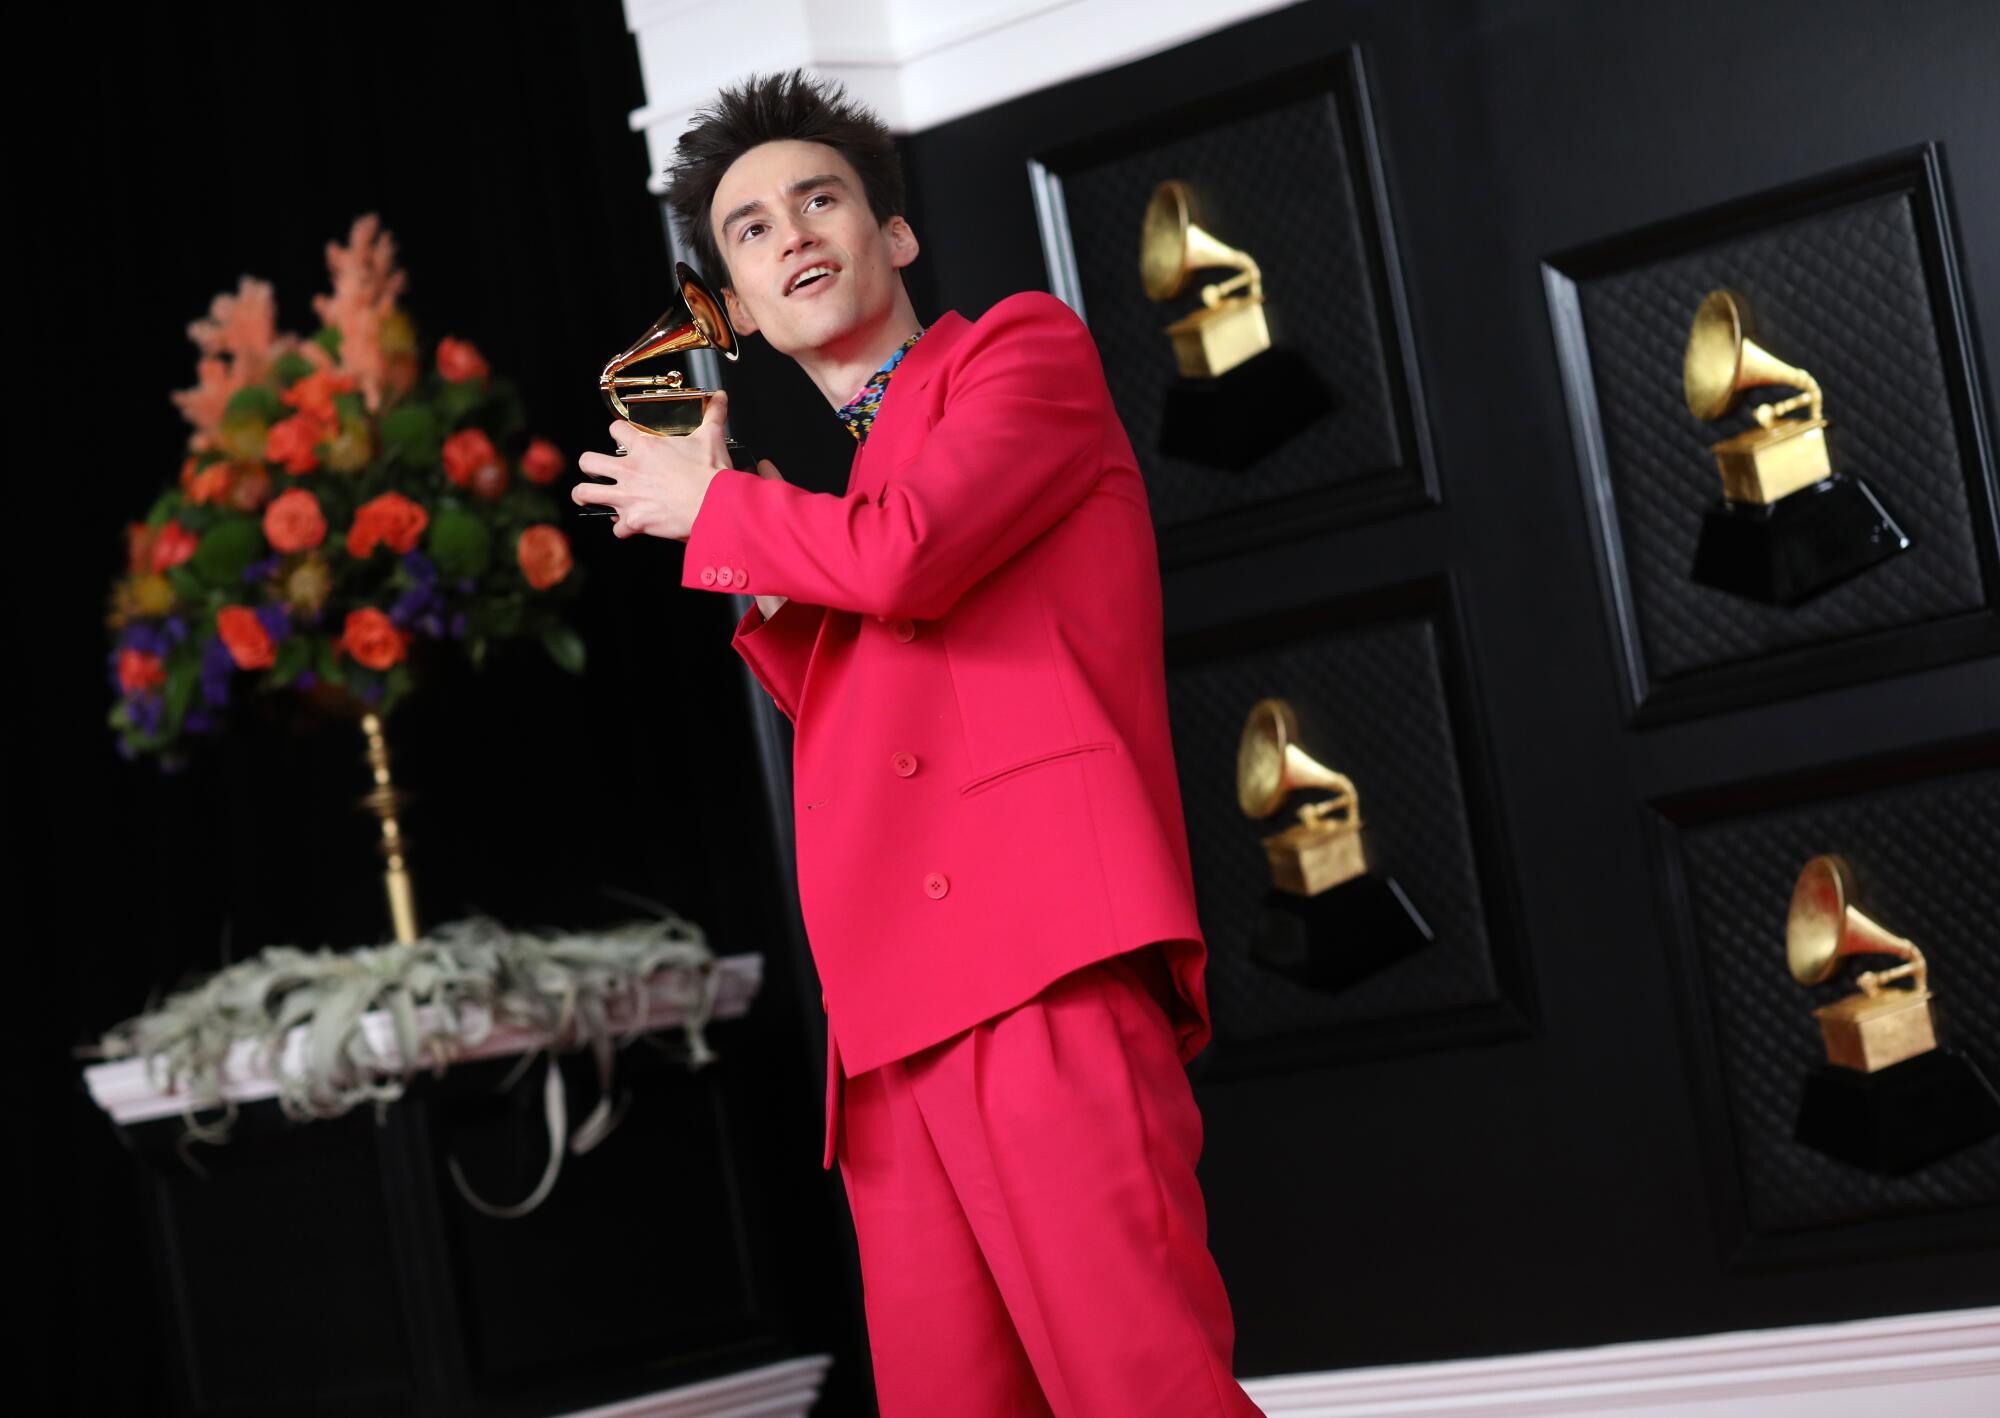 Jacob Collier, in a red suit, holds his Grammy award.